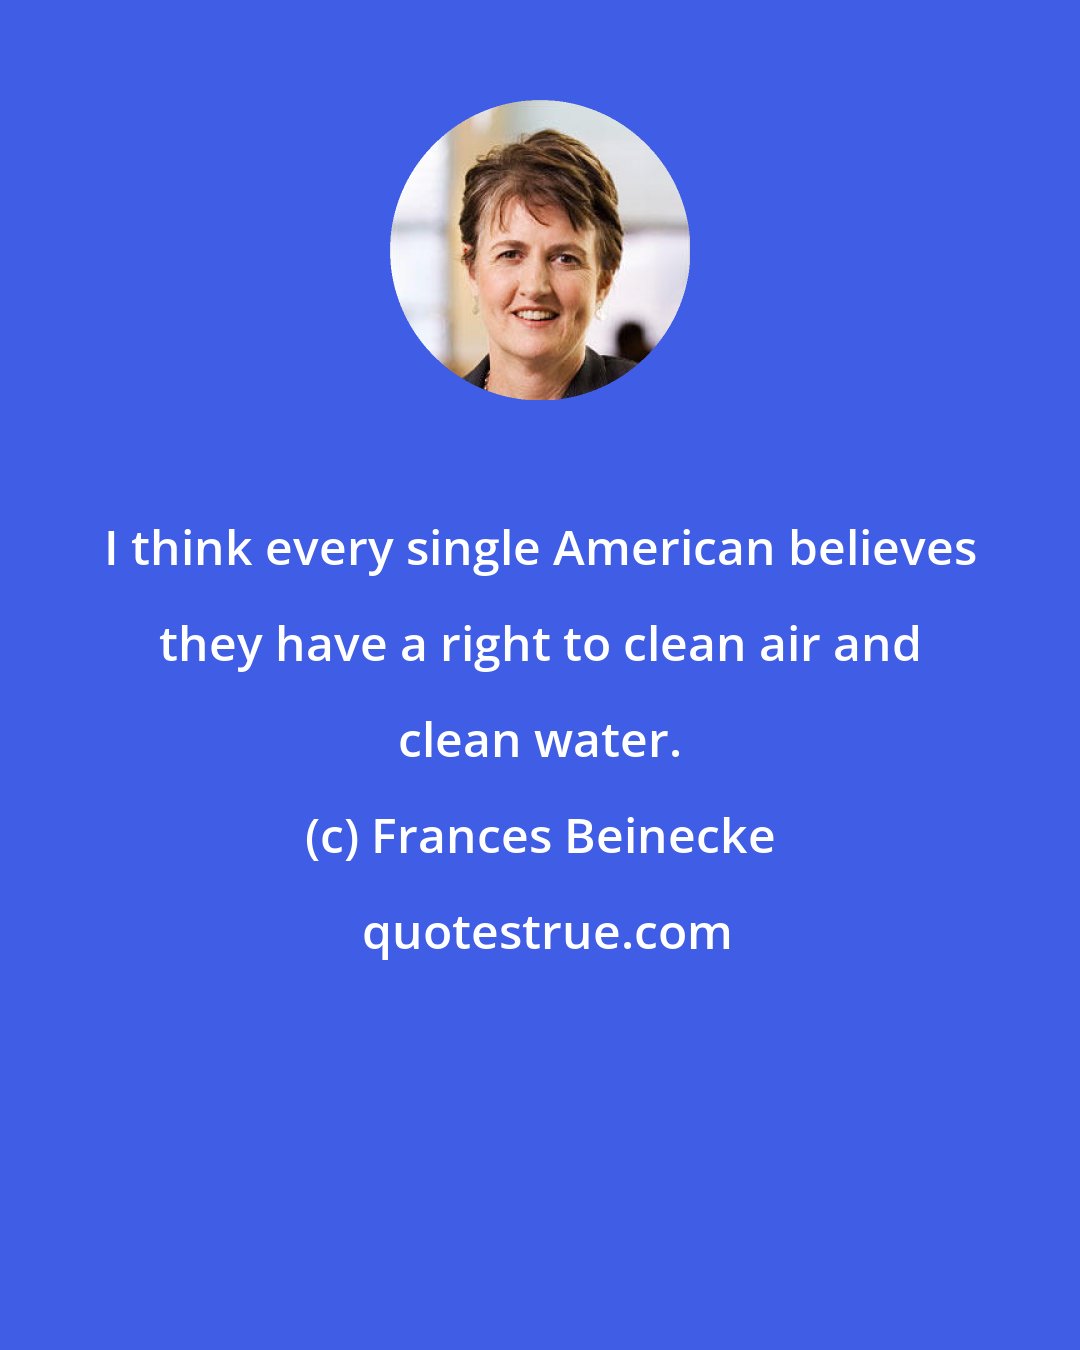 Frances Beinecke: I think every single American believes they have a right to clean air and clean water.